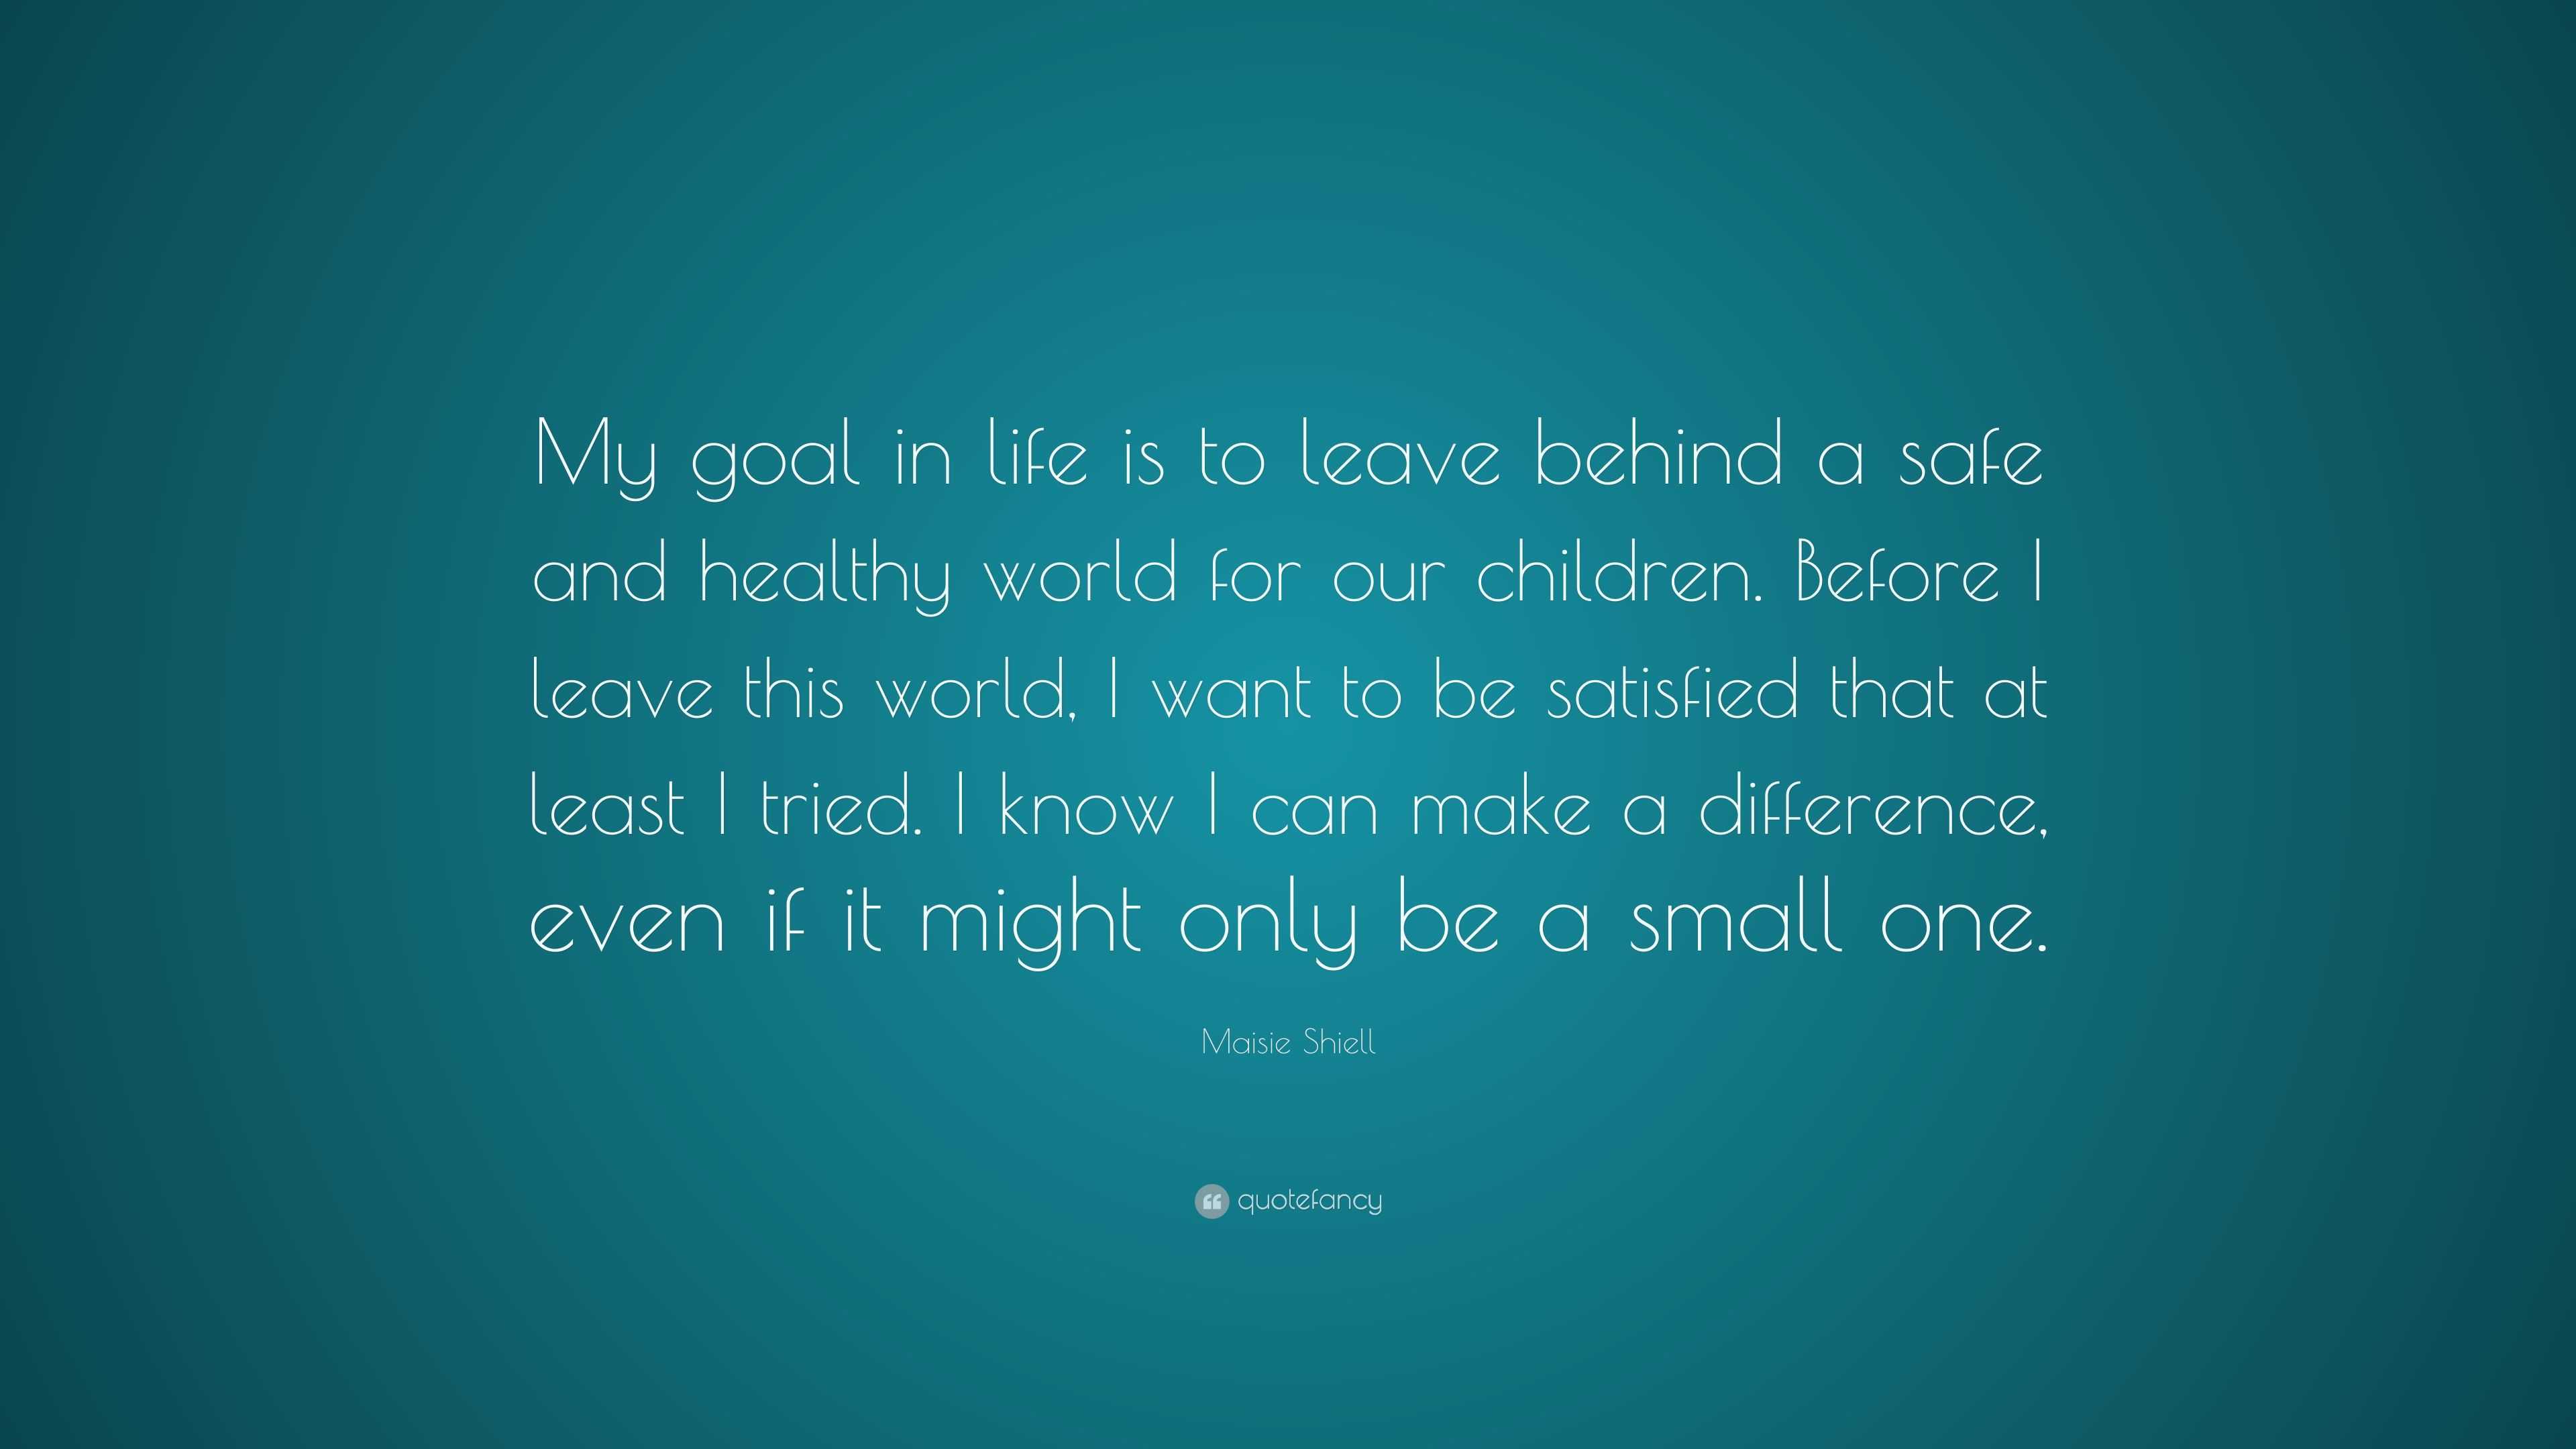 Maisie Shiell Quote “My goal in life is to leave behind a safe and